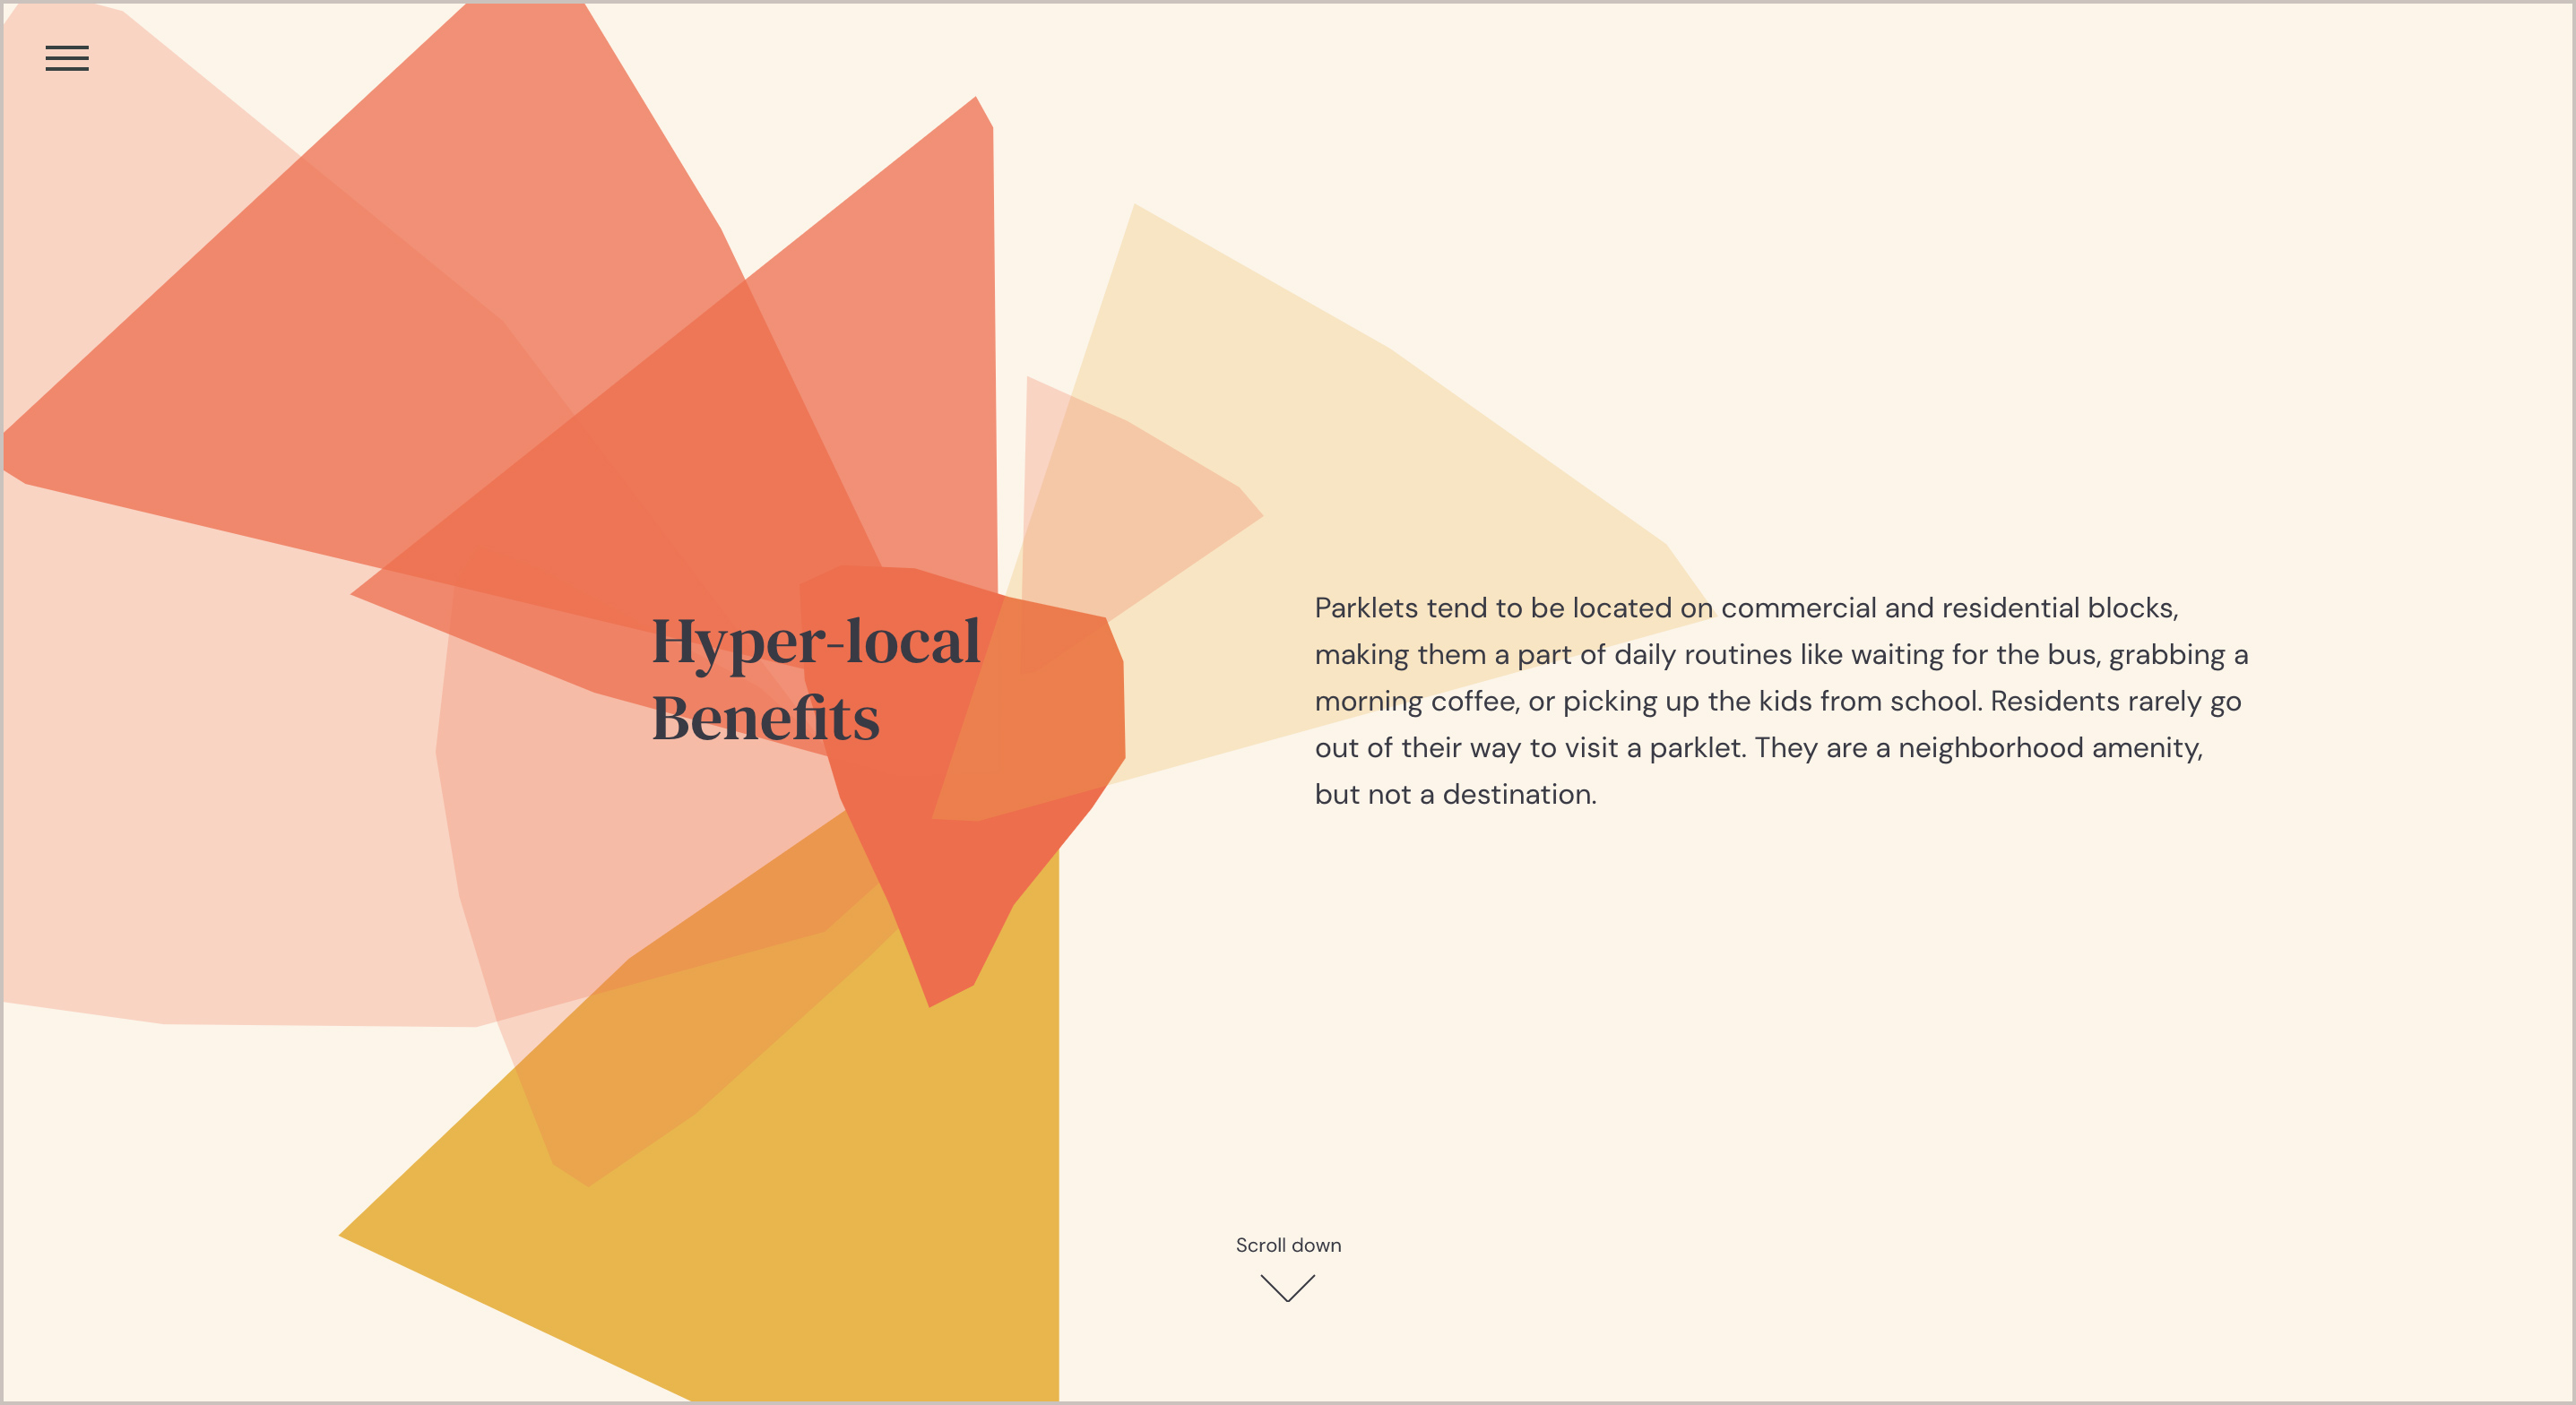 Section 2: Hyper Local Benefits